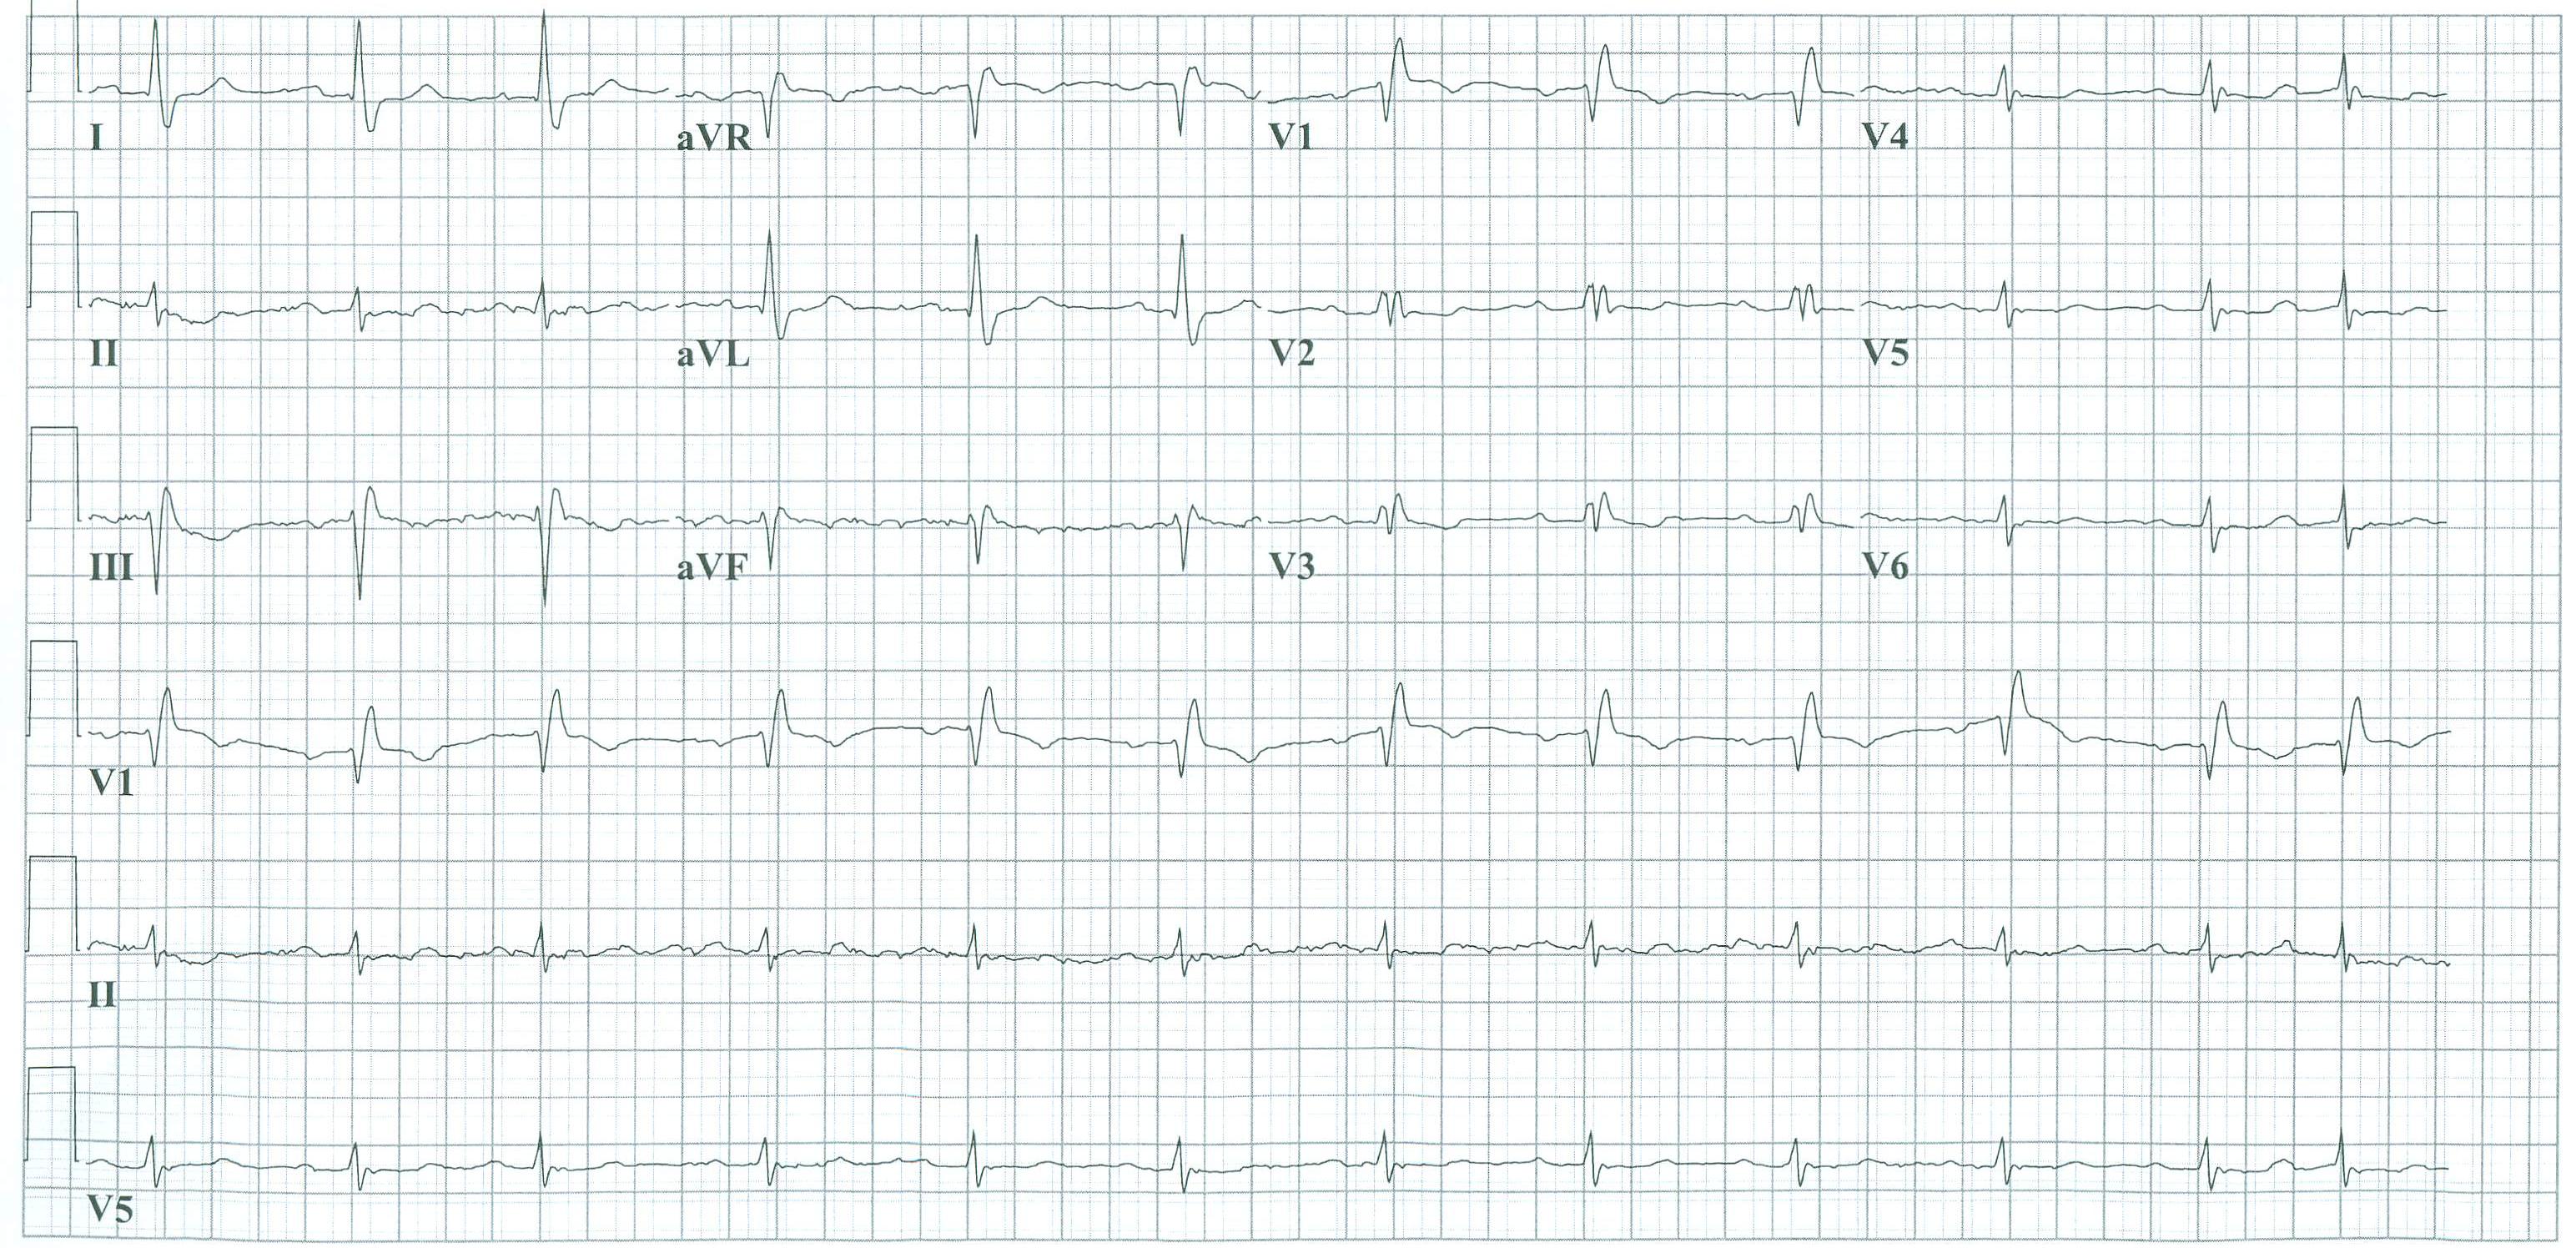 The same patient before acute MI developed. Horizontal axis shown.